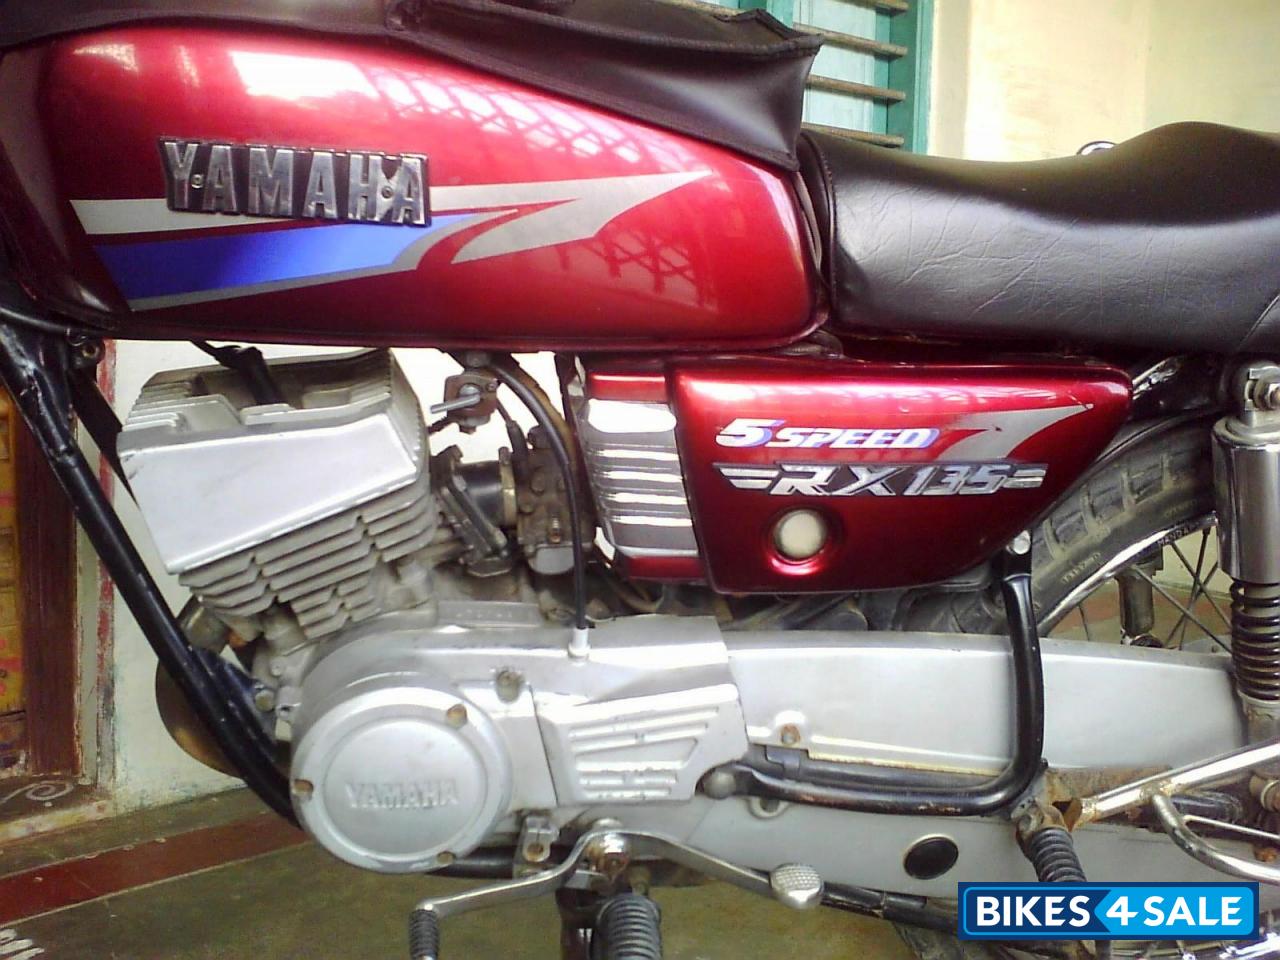 Used 01 Model Yamaha Rx 135 For Sale In Vellore Id 442 Maroon Colour Bikes4sale